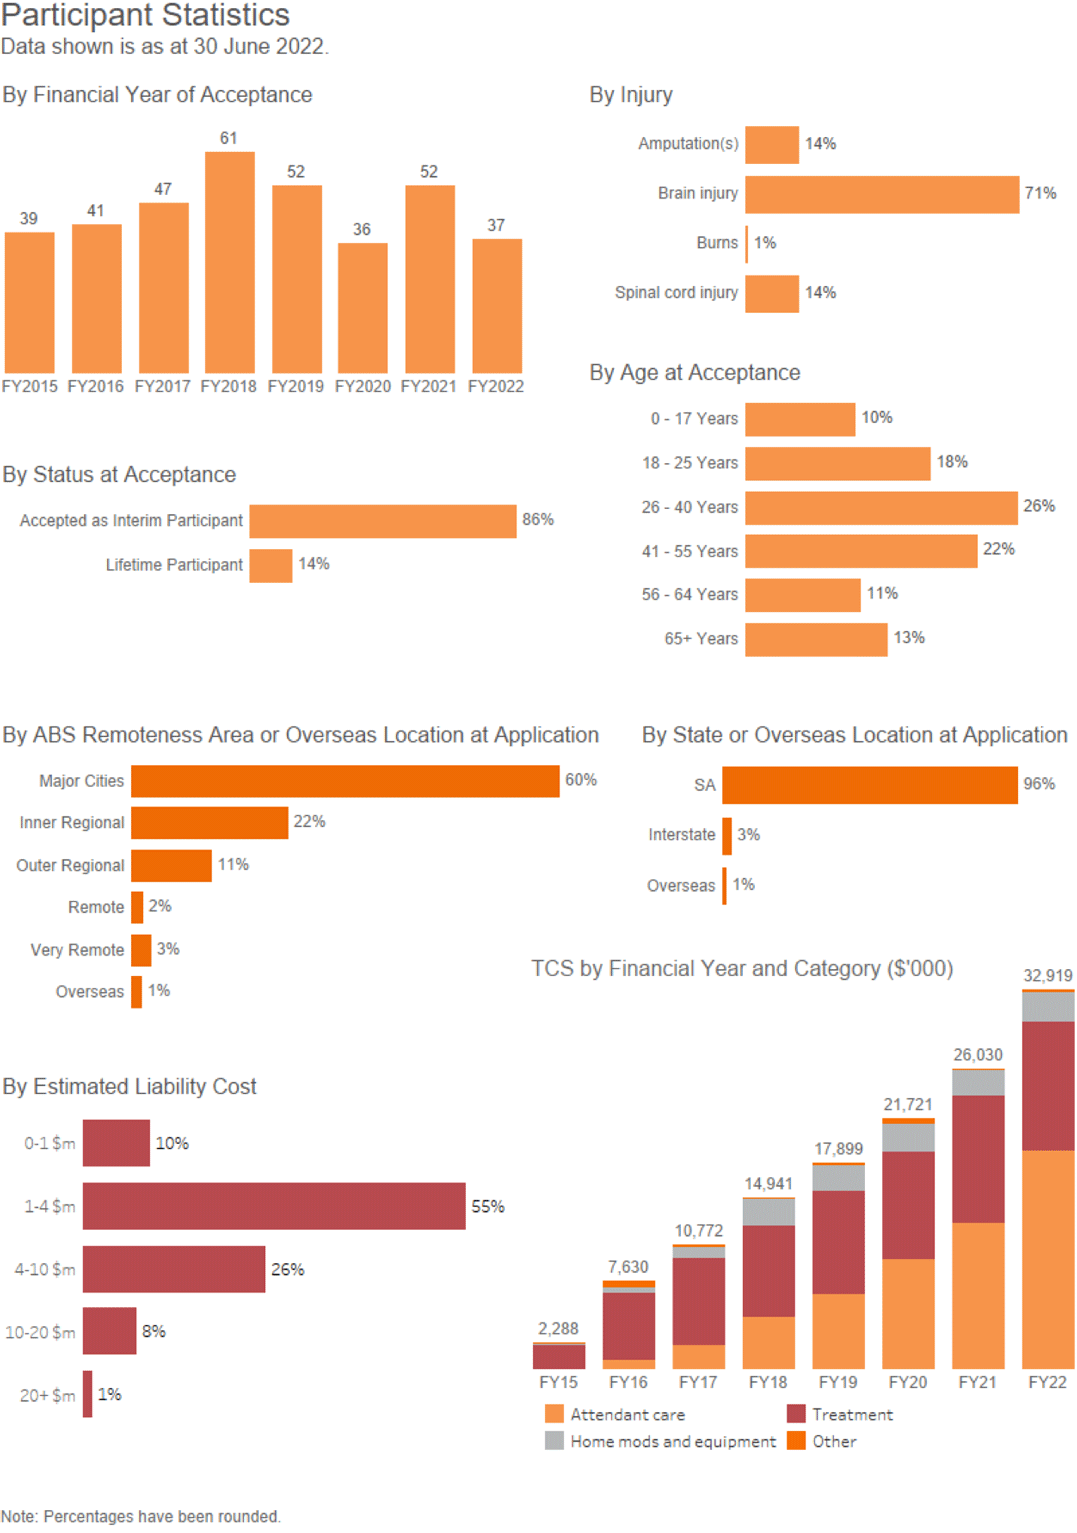 Participant Statistics: Data shown is as at 30 June 2022